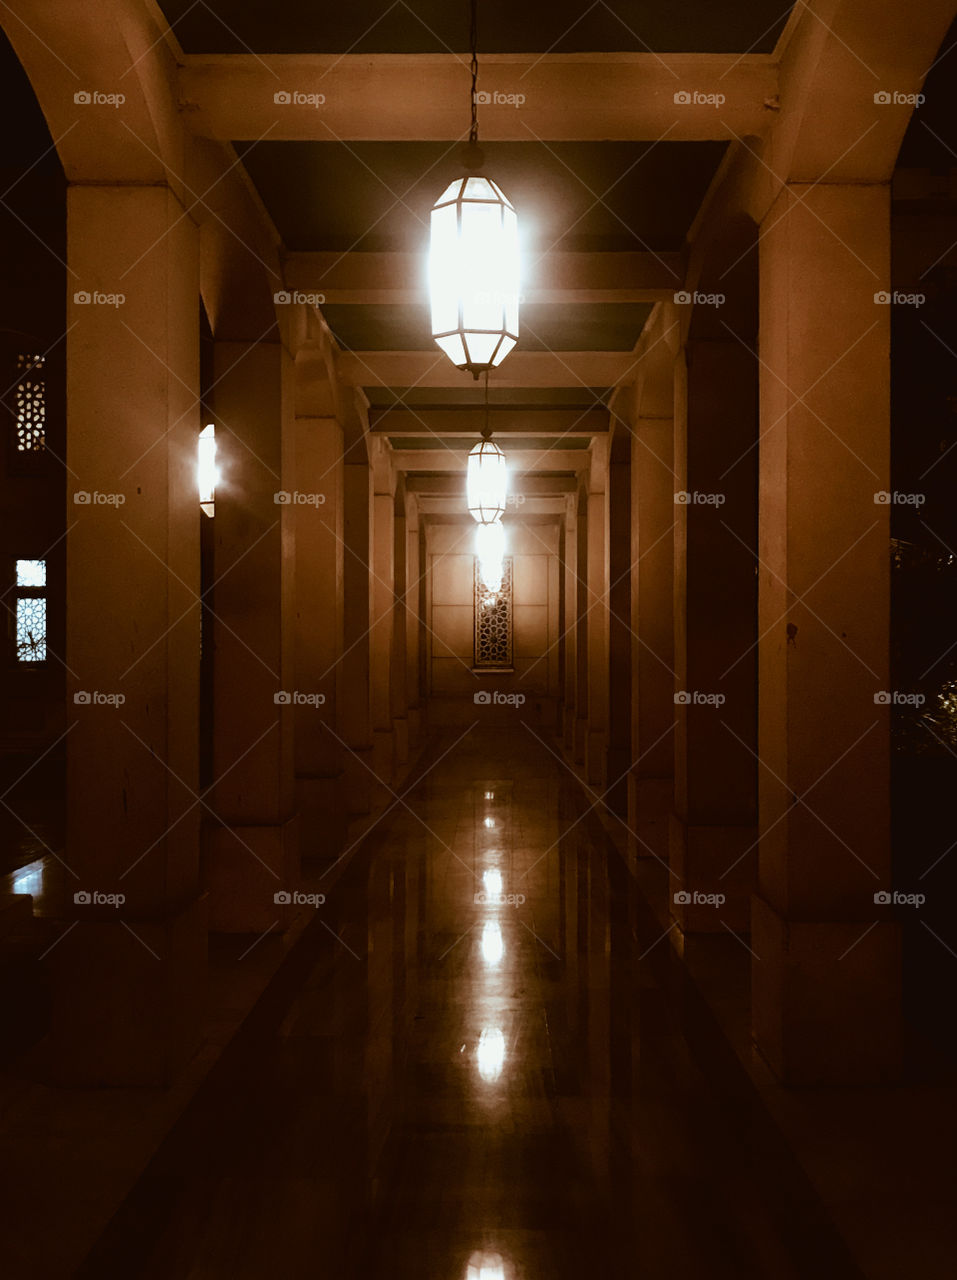 A hall way in the cairo opera house at night, are u scared?did u get that vibe im sending? Yea, ur welcome ^-^